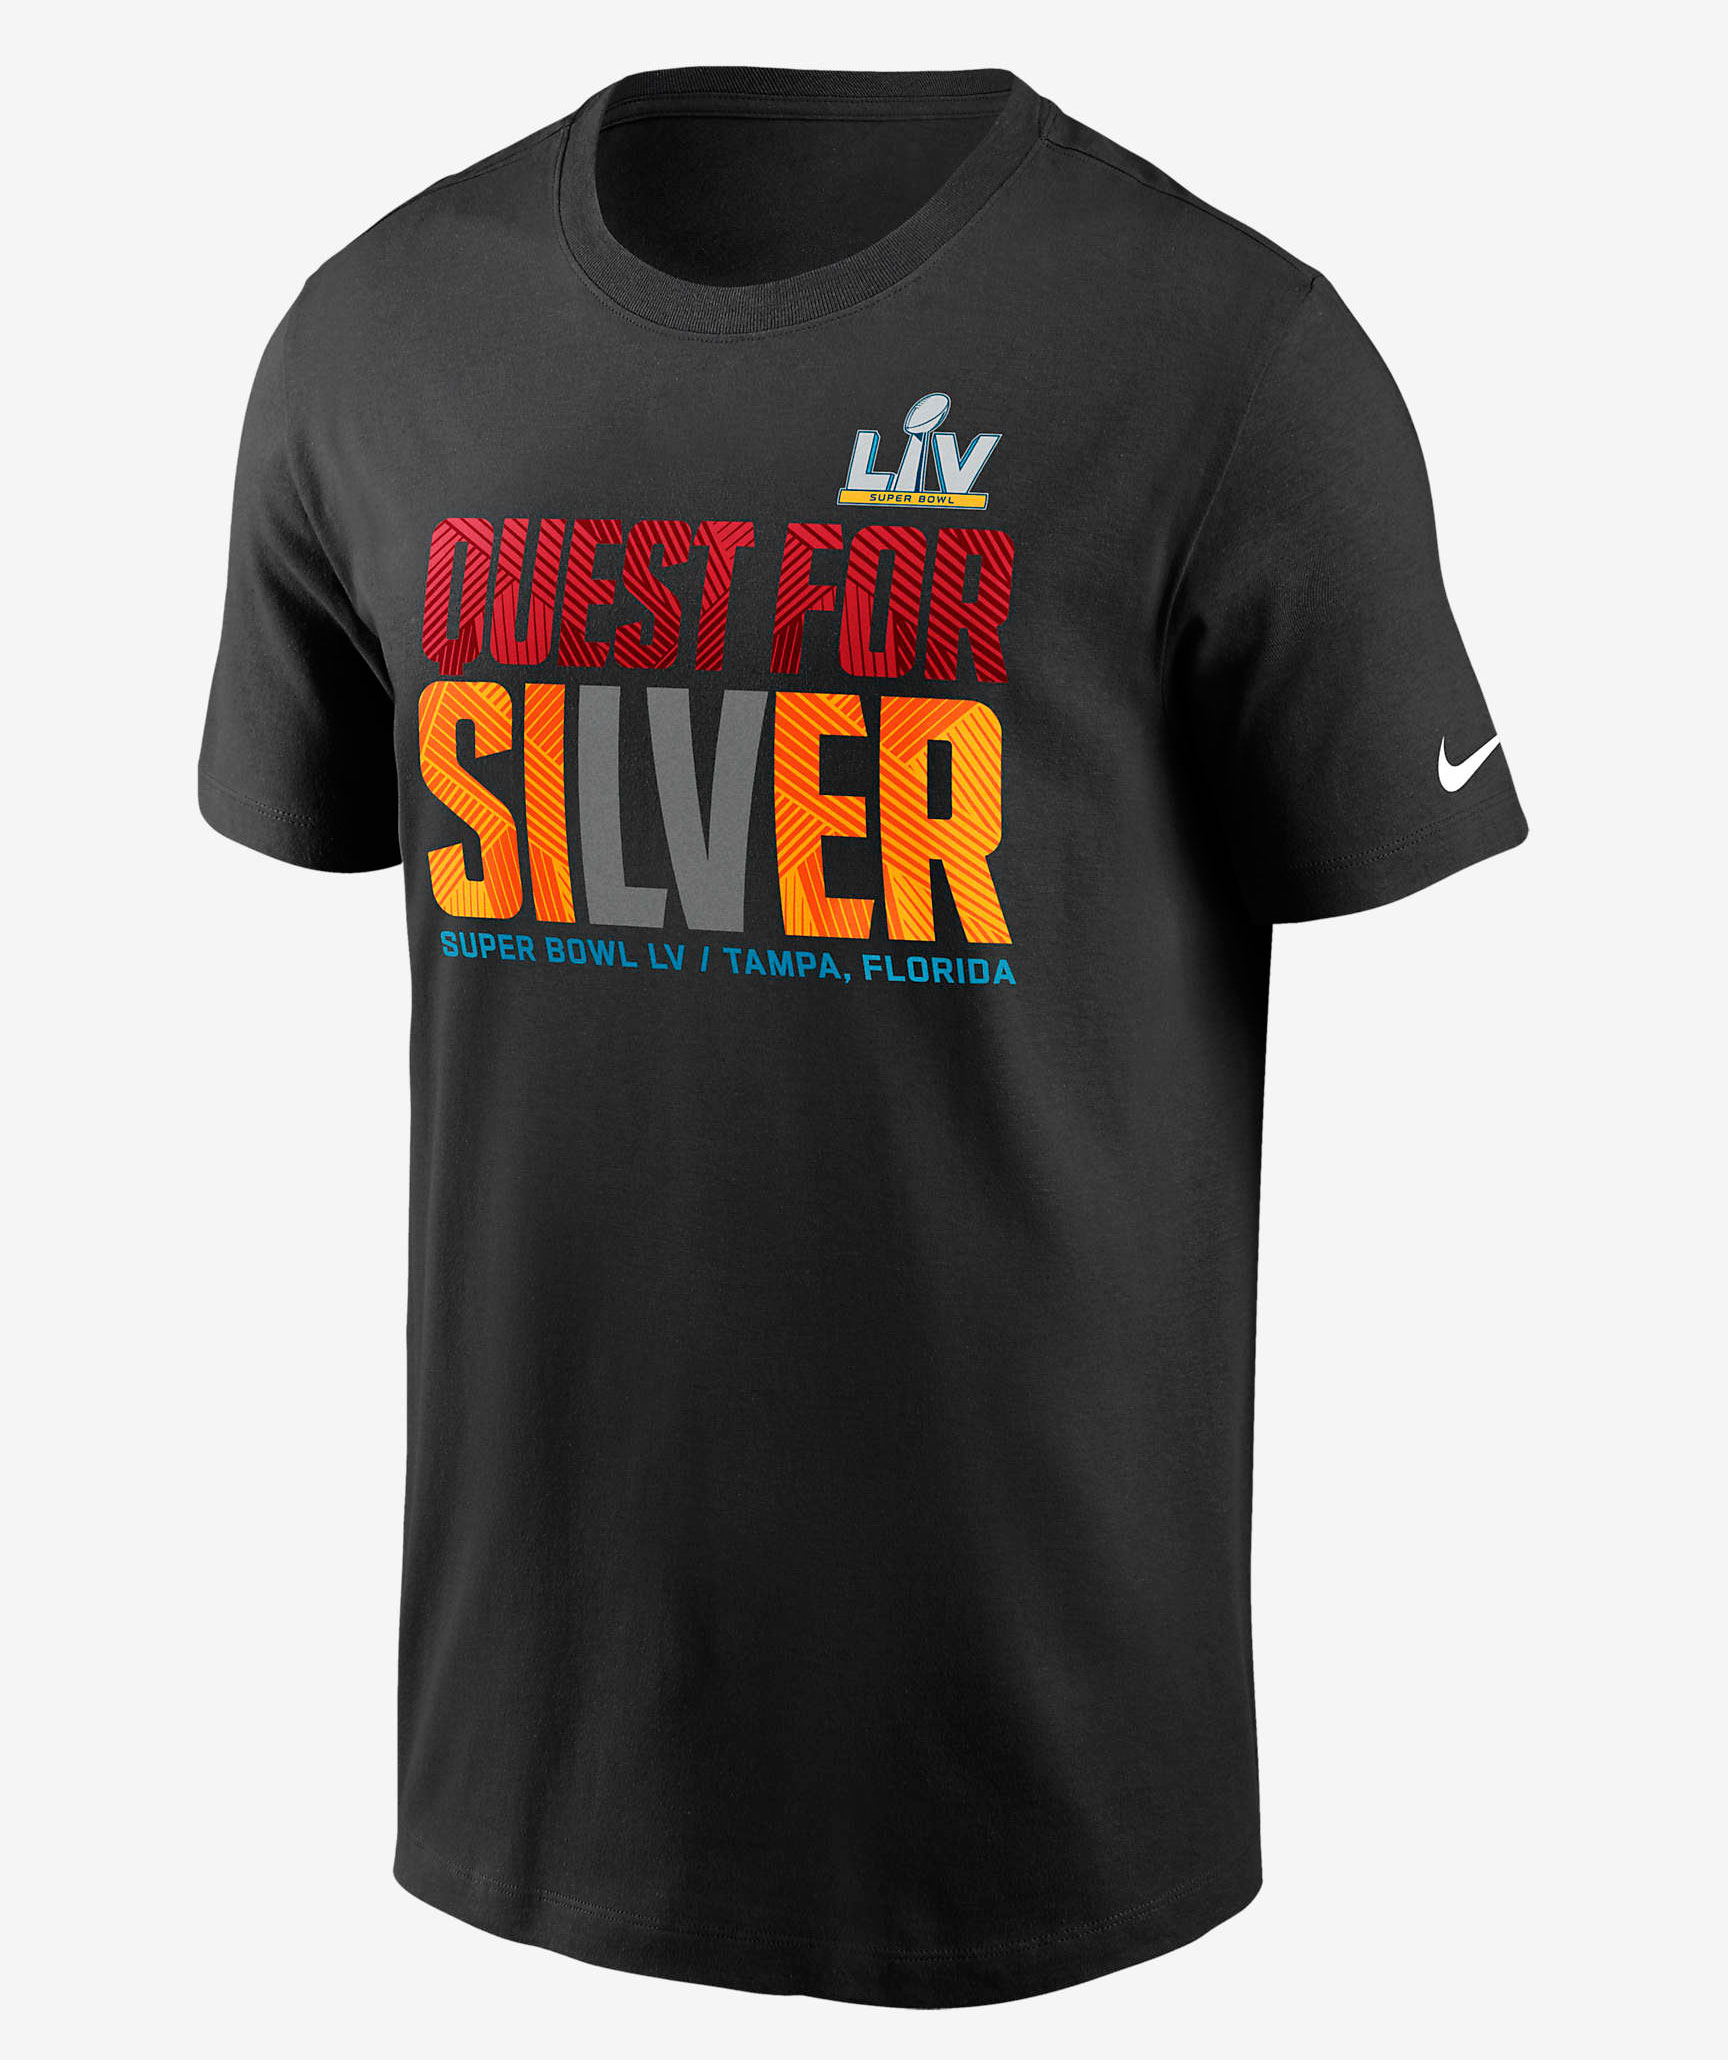 super-bowl-lv-nike-quest-for-silver-shirt